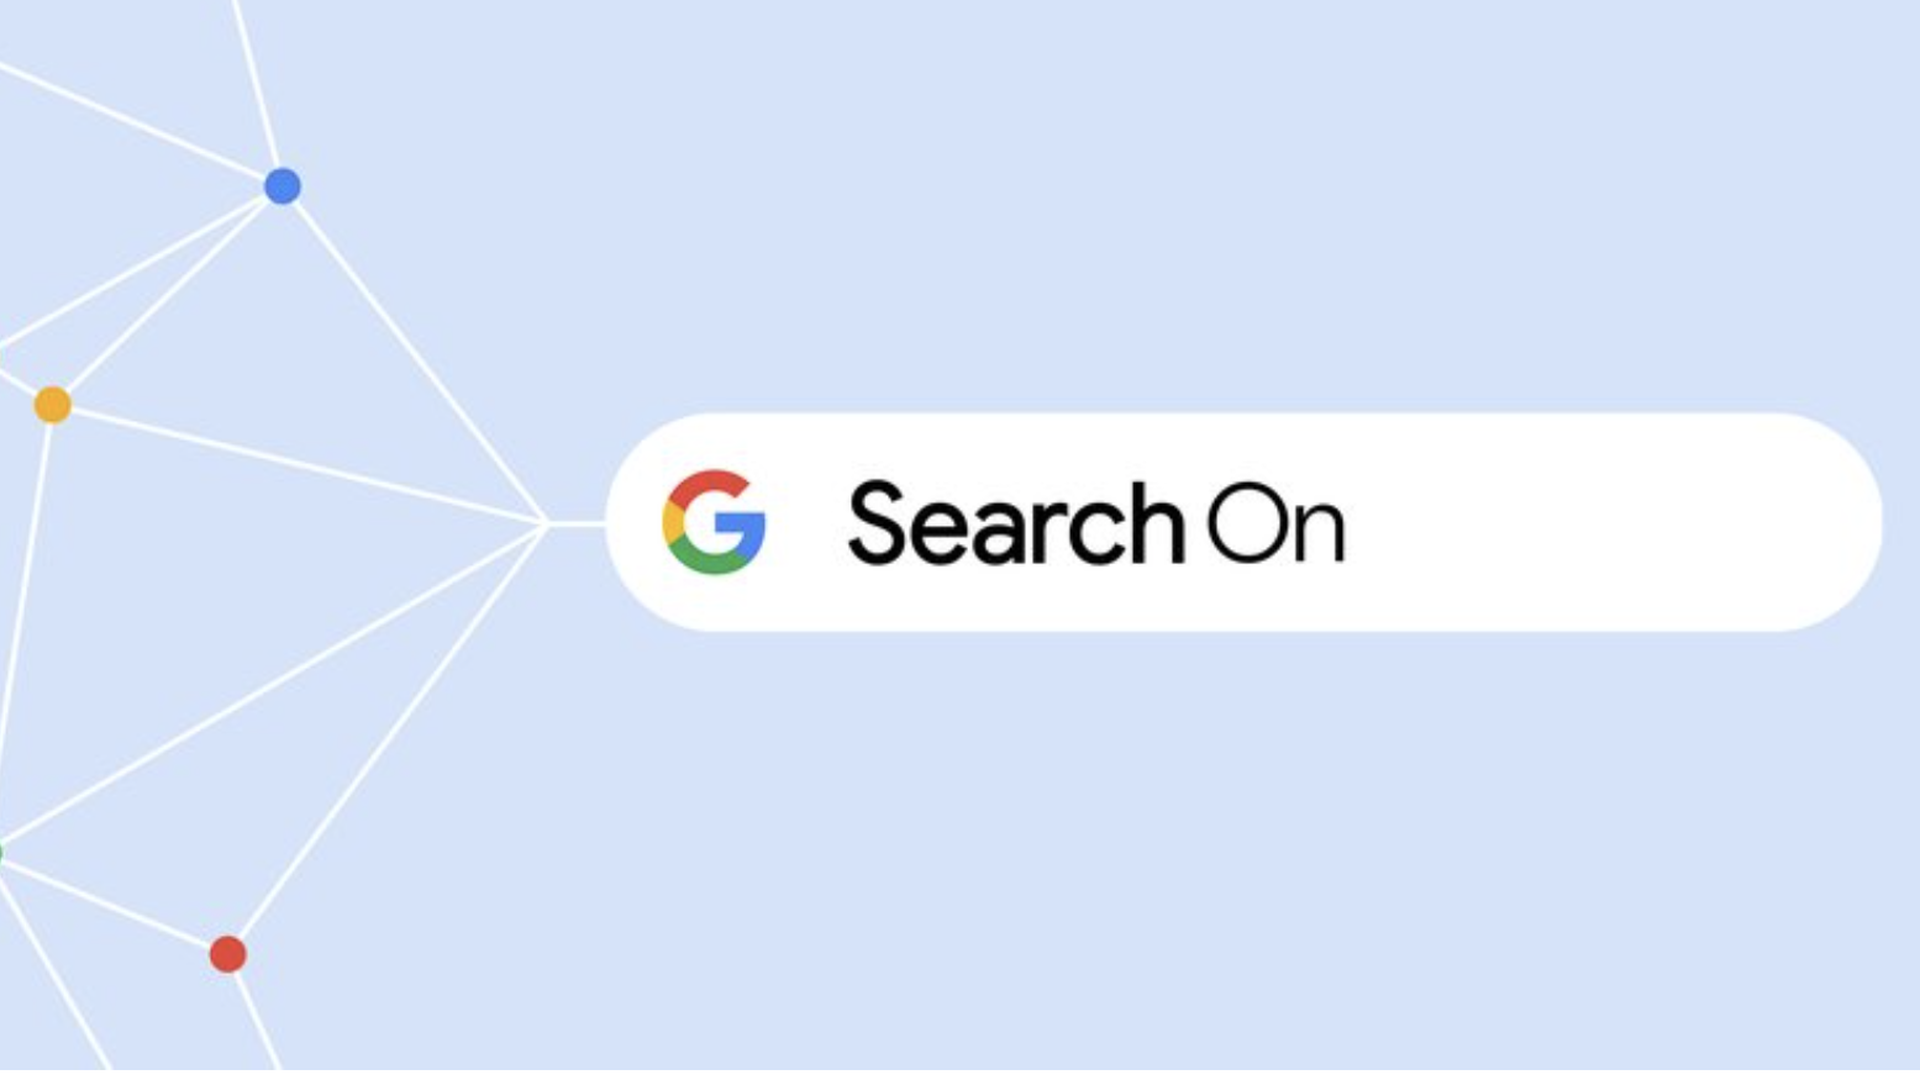 Screenshot of a Google search bar with the words "Search On" written inside the bar